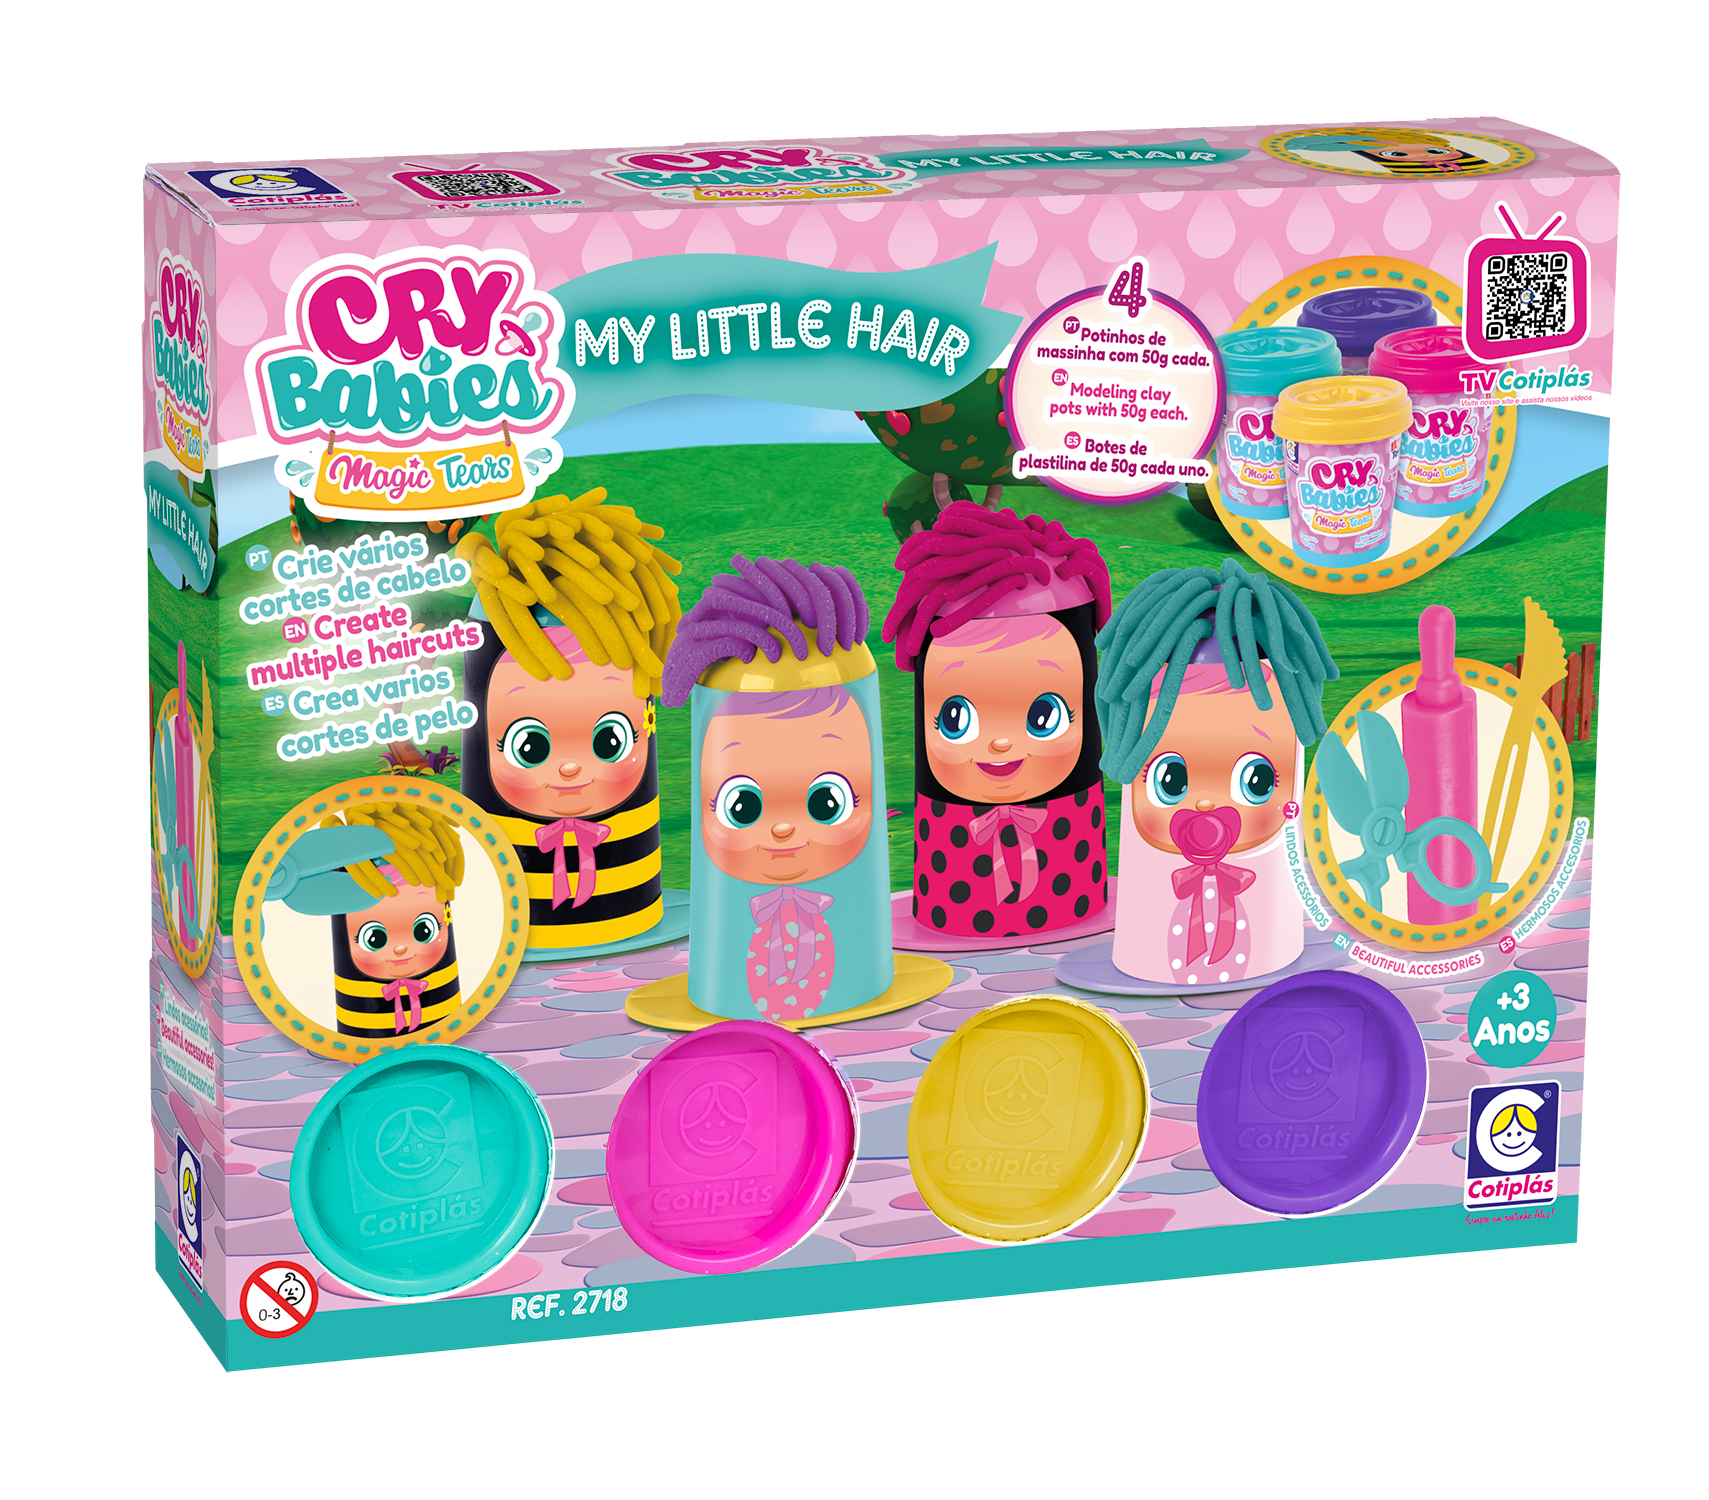 7896964627185 - MASSINHA MY LITTLE HAIR CRY BABIES 2718 COTIPLAS